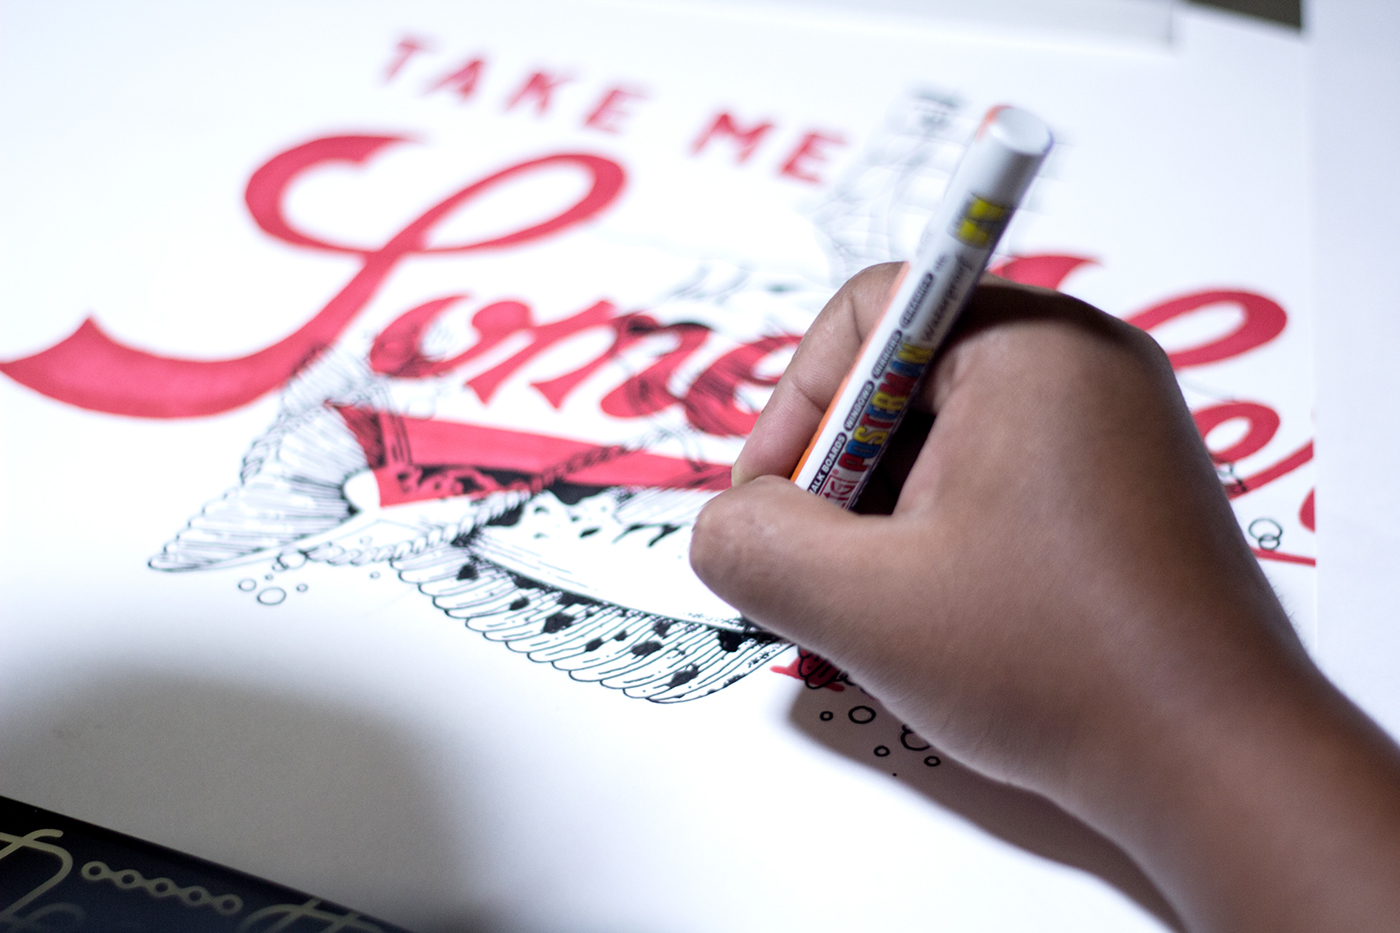 calidoso Cali2o timelapse video process wip lettering hand crafted artwork